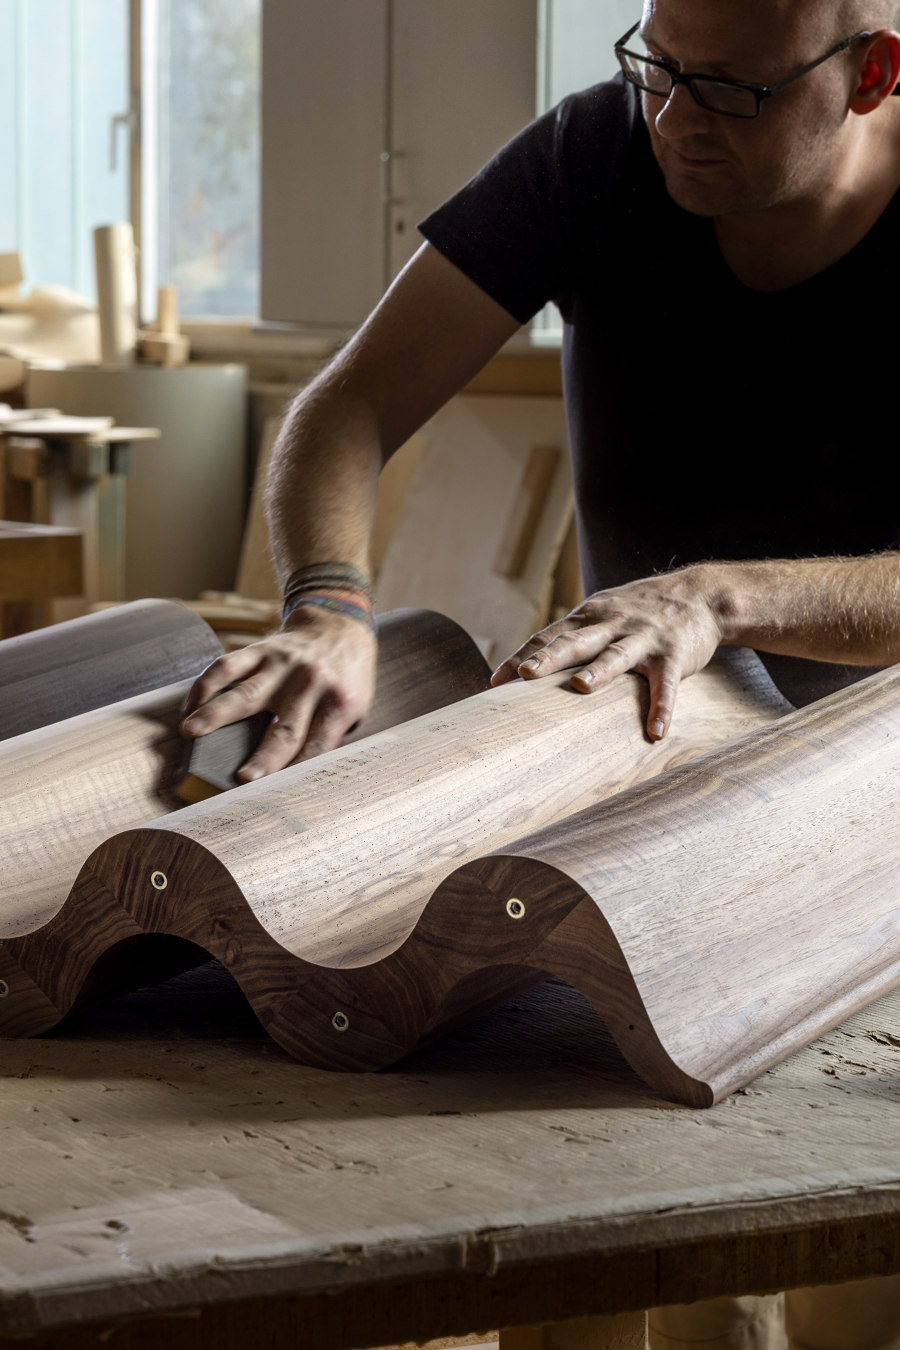 Crafting furniture with skill and sensitivity | News